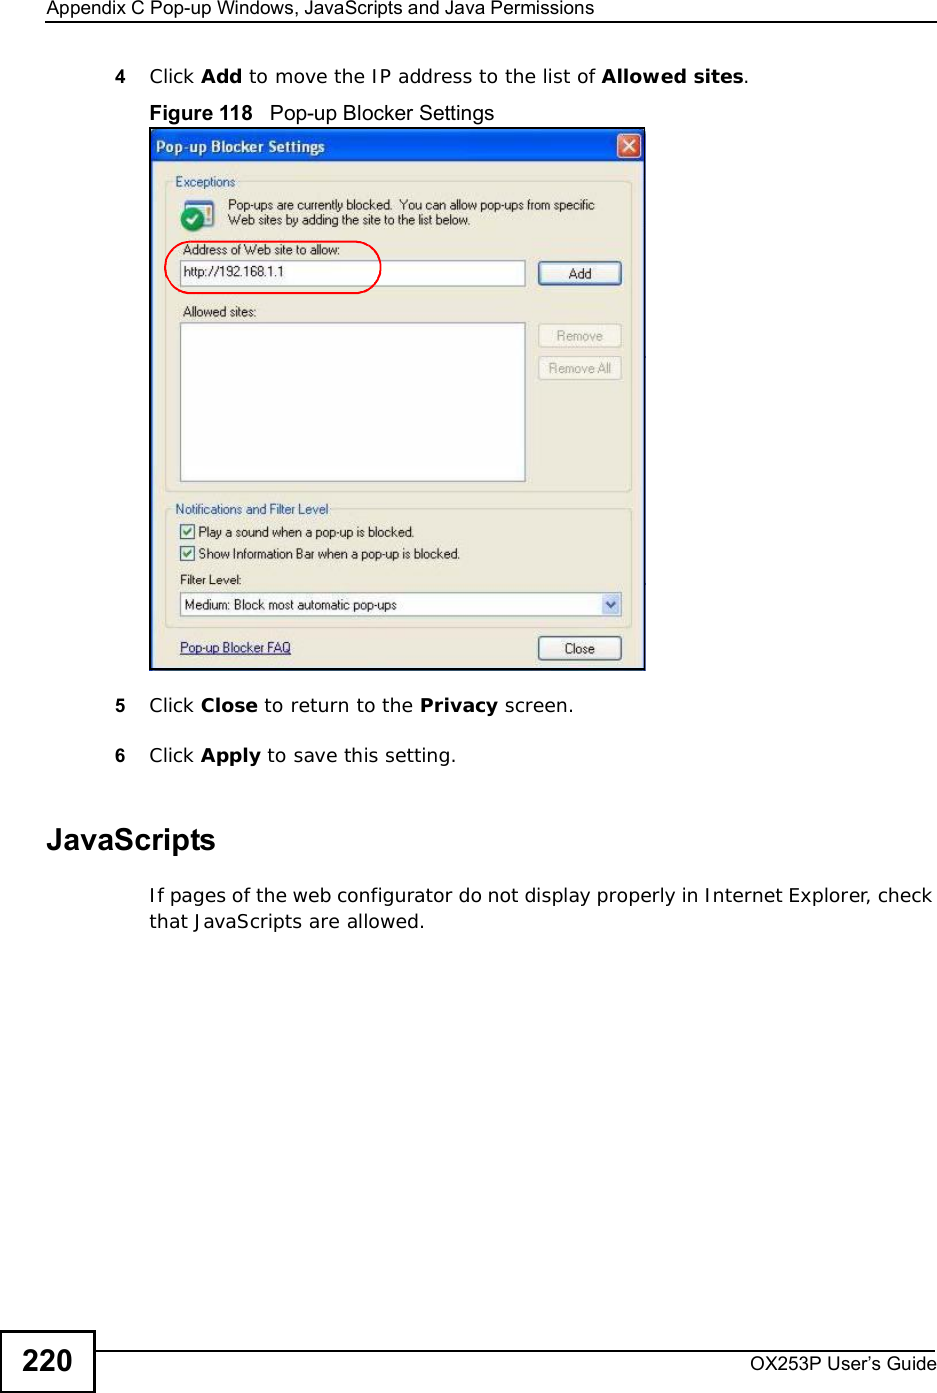 Appendix CPop-up Windows, JavaScripts and Java PermissionsOX253P User’s Guide2204Click Add to move the IP address to the list of Allowed sites.Figure 118   Pop-up Blocker Settings5Click Close to return to the Privacy screen. 6Click Apply to save this setting. JavaScriptsIf pages of the web configurator do not display properly in Internet Explorer, check that JavaScripts are allowed. 